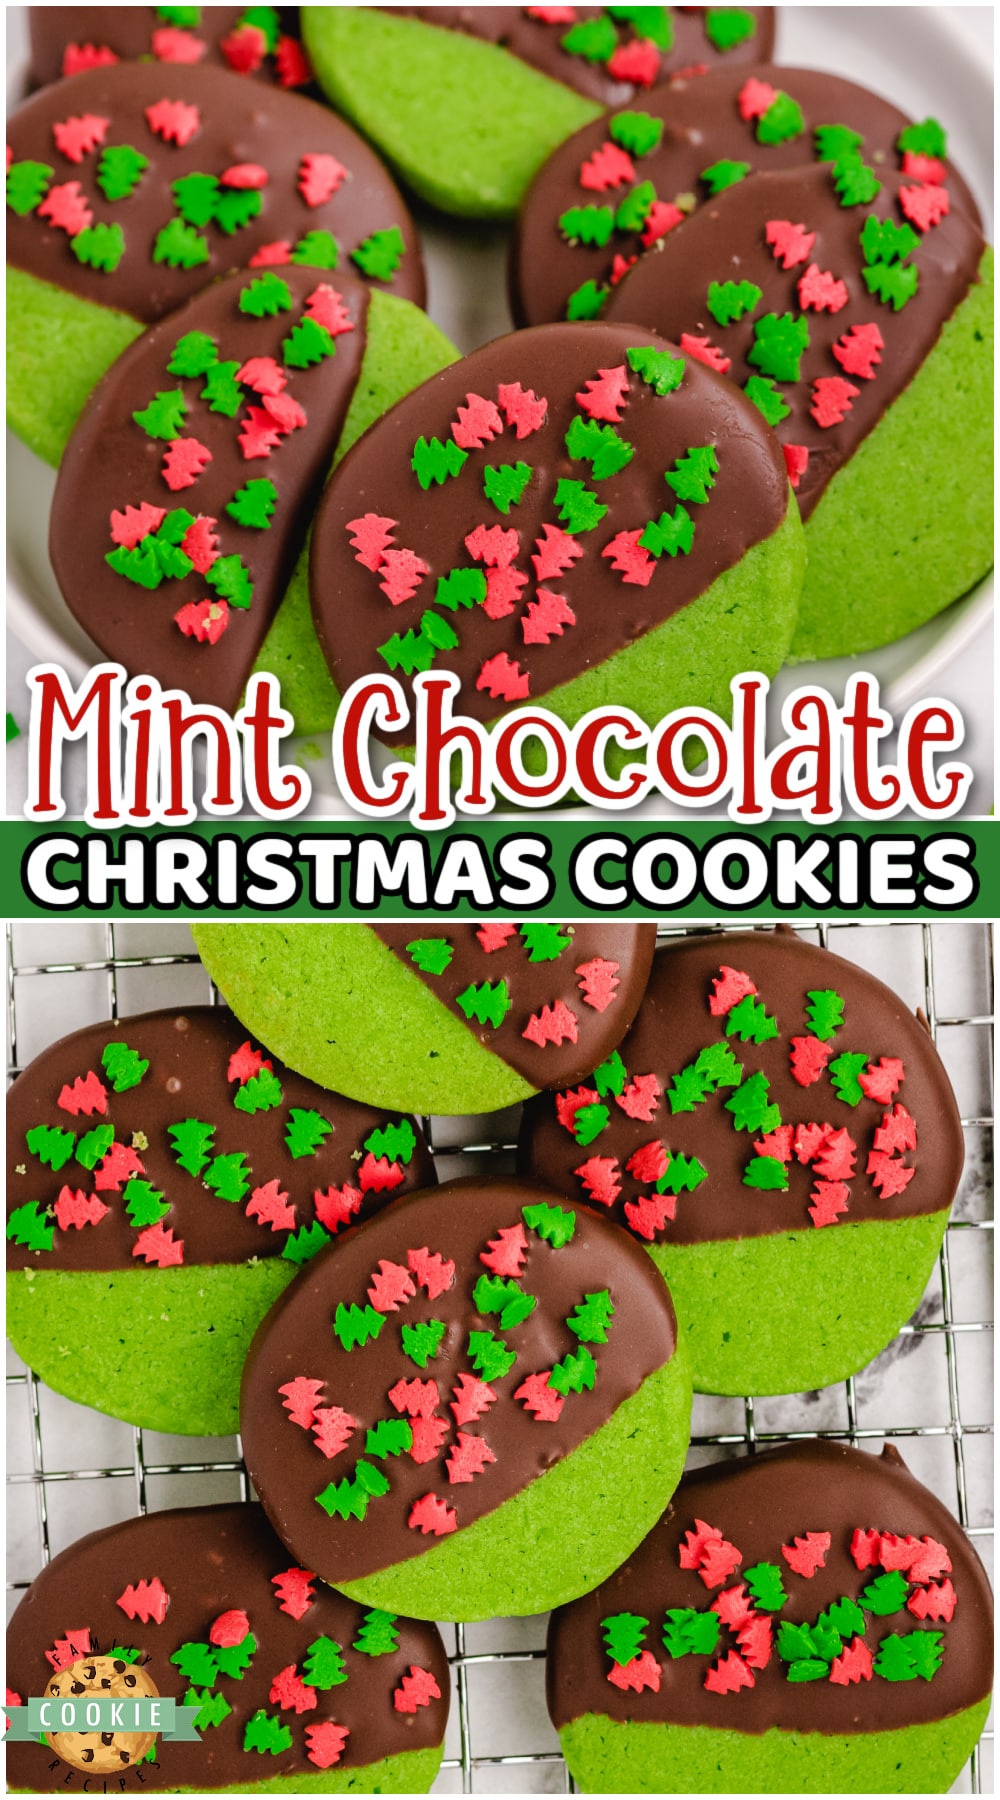 Mint Christmas Cookies made from a buttery shortbread cookie dipped in chocolate & topped with holiday sprinkles. Green Christmas Cookies perfect for cookie exchanges and gift plates!